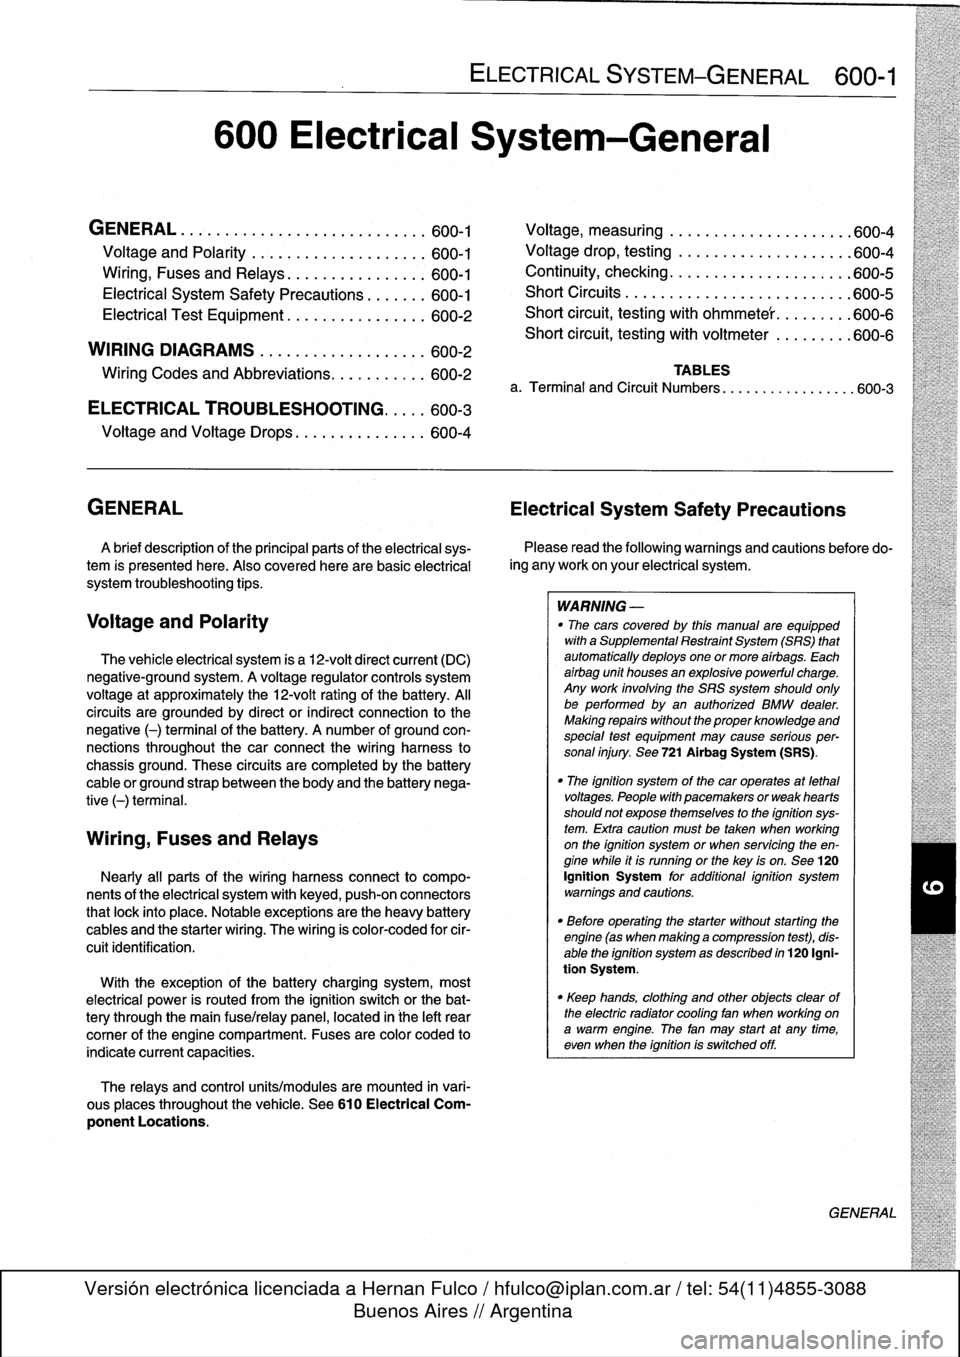 BMW 318i 1997 E36 User Guide 
600
Electrical
System-General

GENERAL
.
...........
.
.
.
.
.
.
.
.
.
...
.
...
600-1

Voltage
and
Polarity
........
.
.
.
.
.
.
.
.....
600-1

Ming,
Fuses
and
Relays
............
.
.
.
.
600-1

Ele